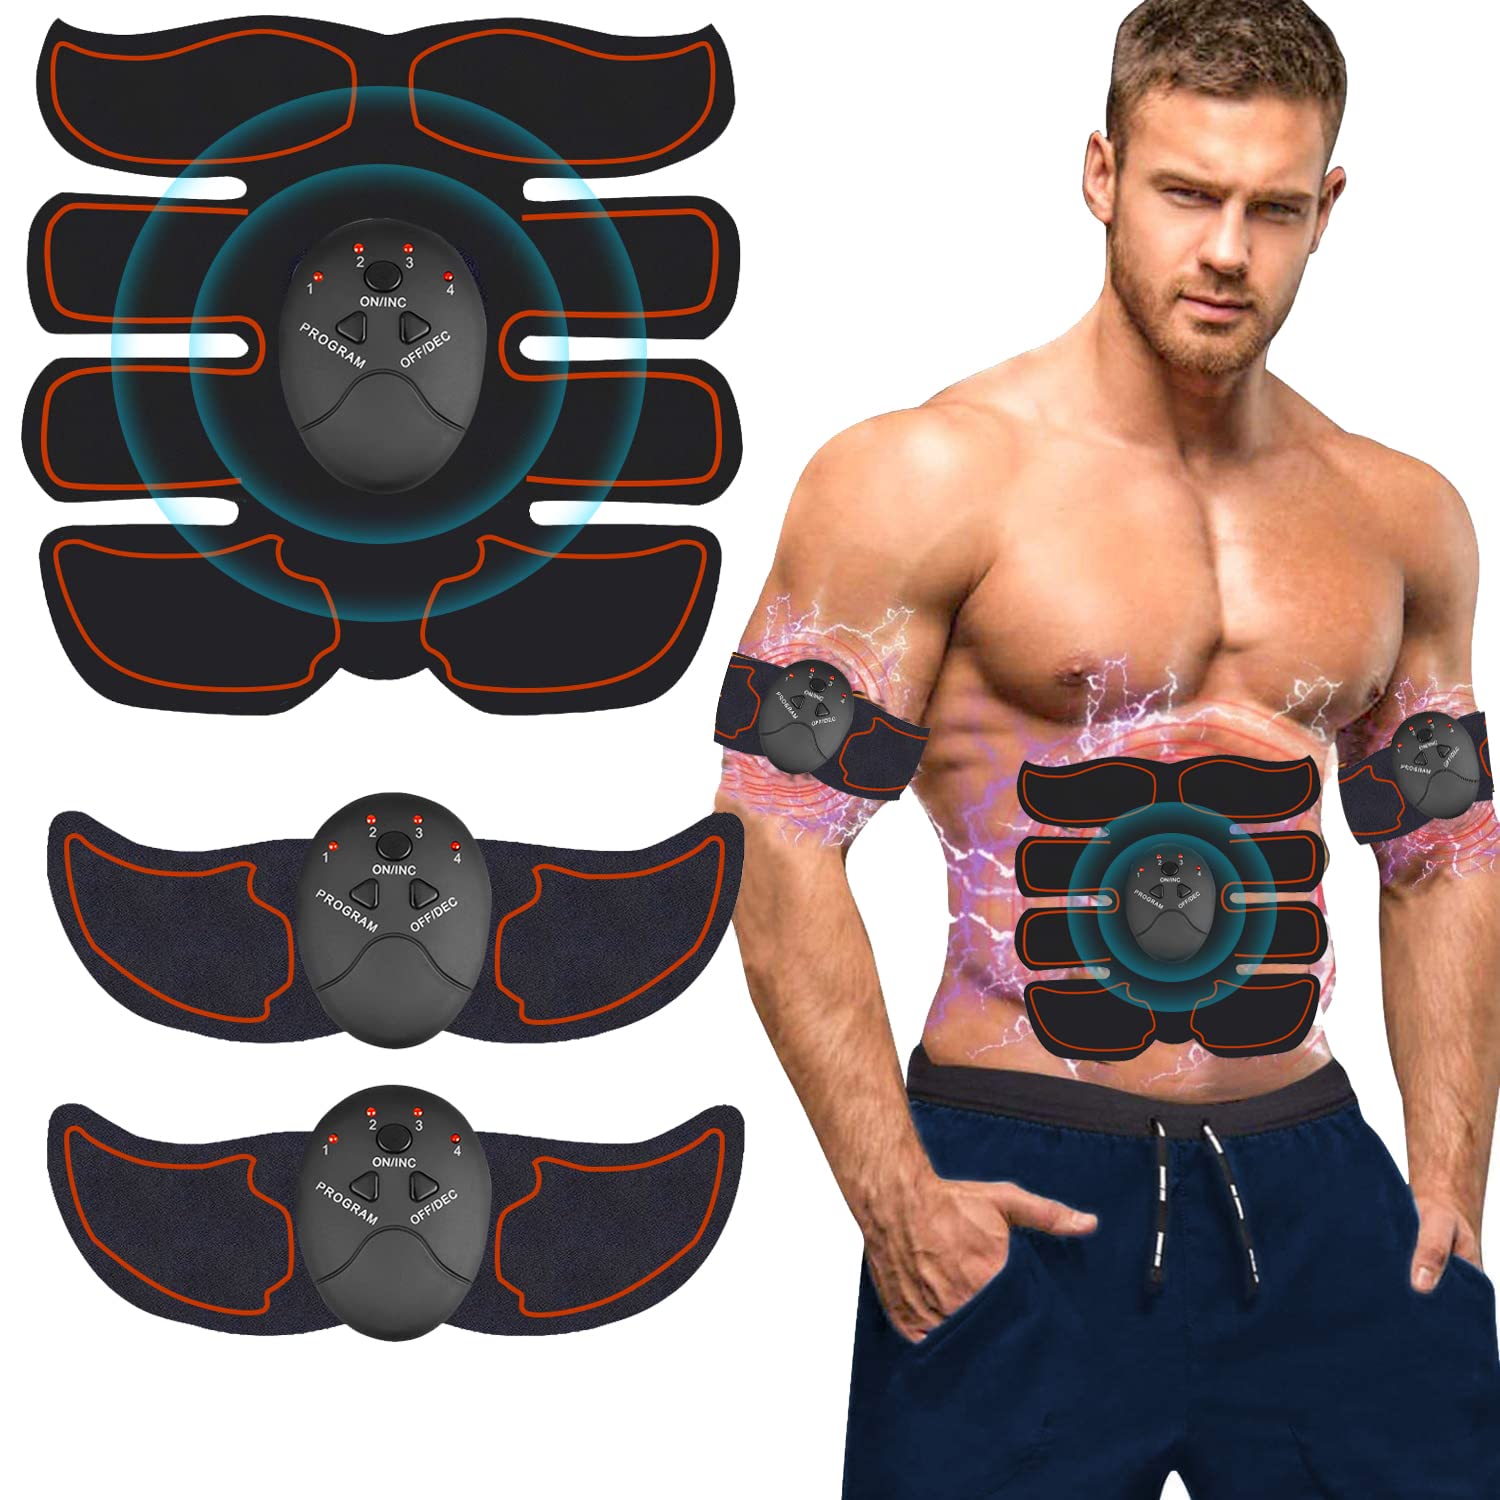 ABS Stimulator, Abs Trainer, Abs Toning Belt, Muscle Toner, Abdominal  Training Belt Workout Portable Fitness Equipment